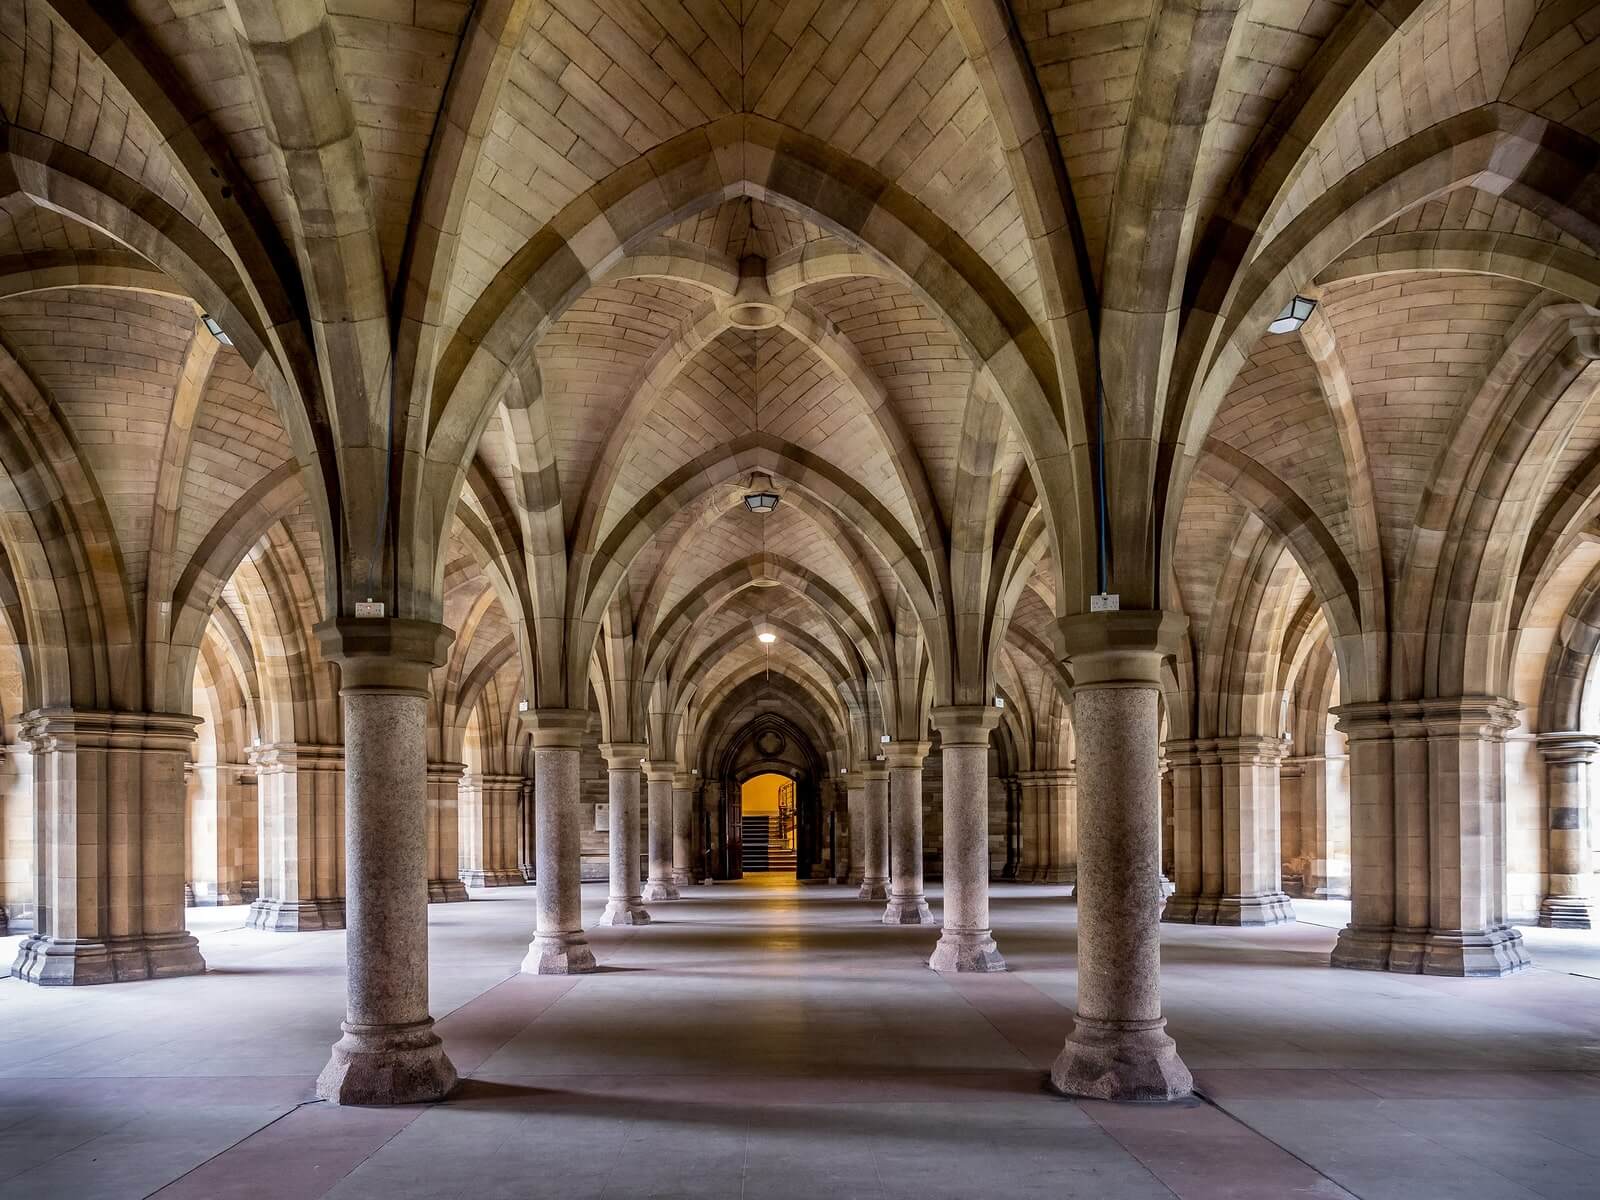 Cloisters in the University of Glasgow